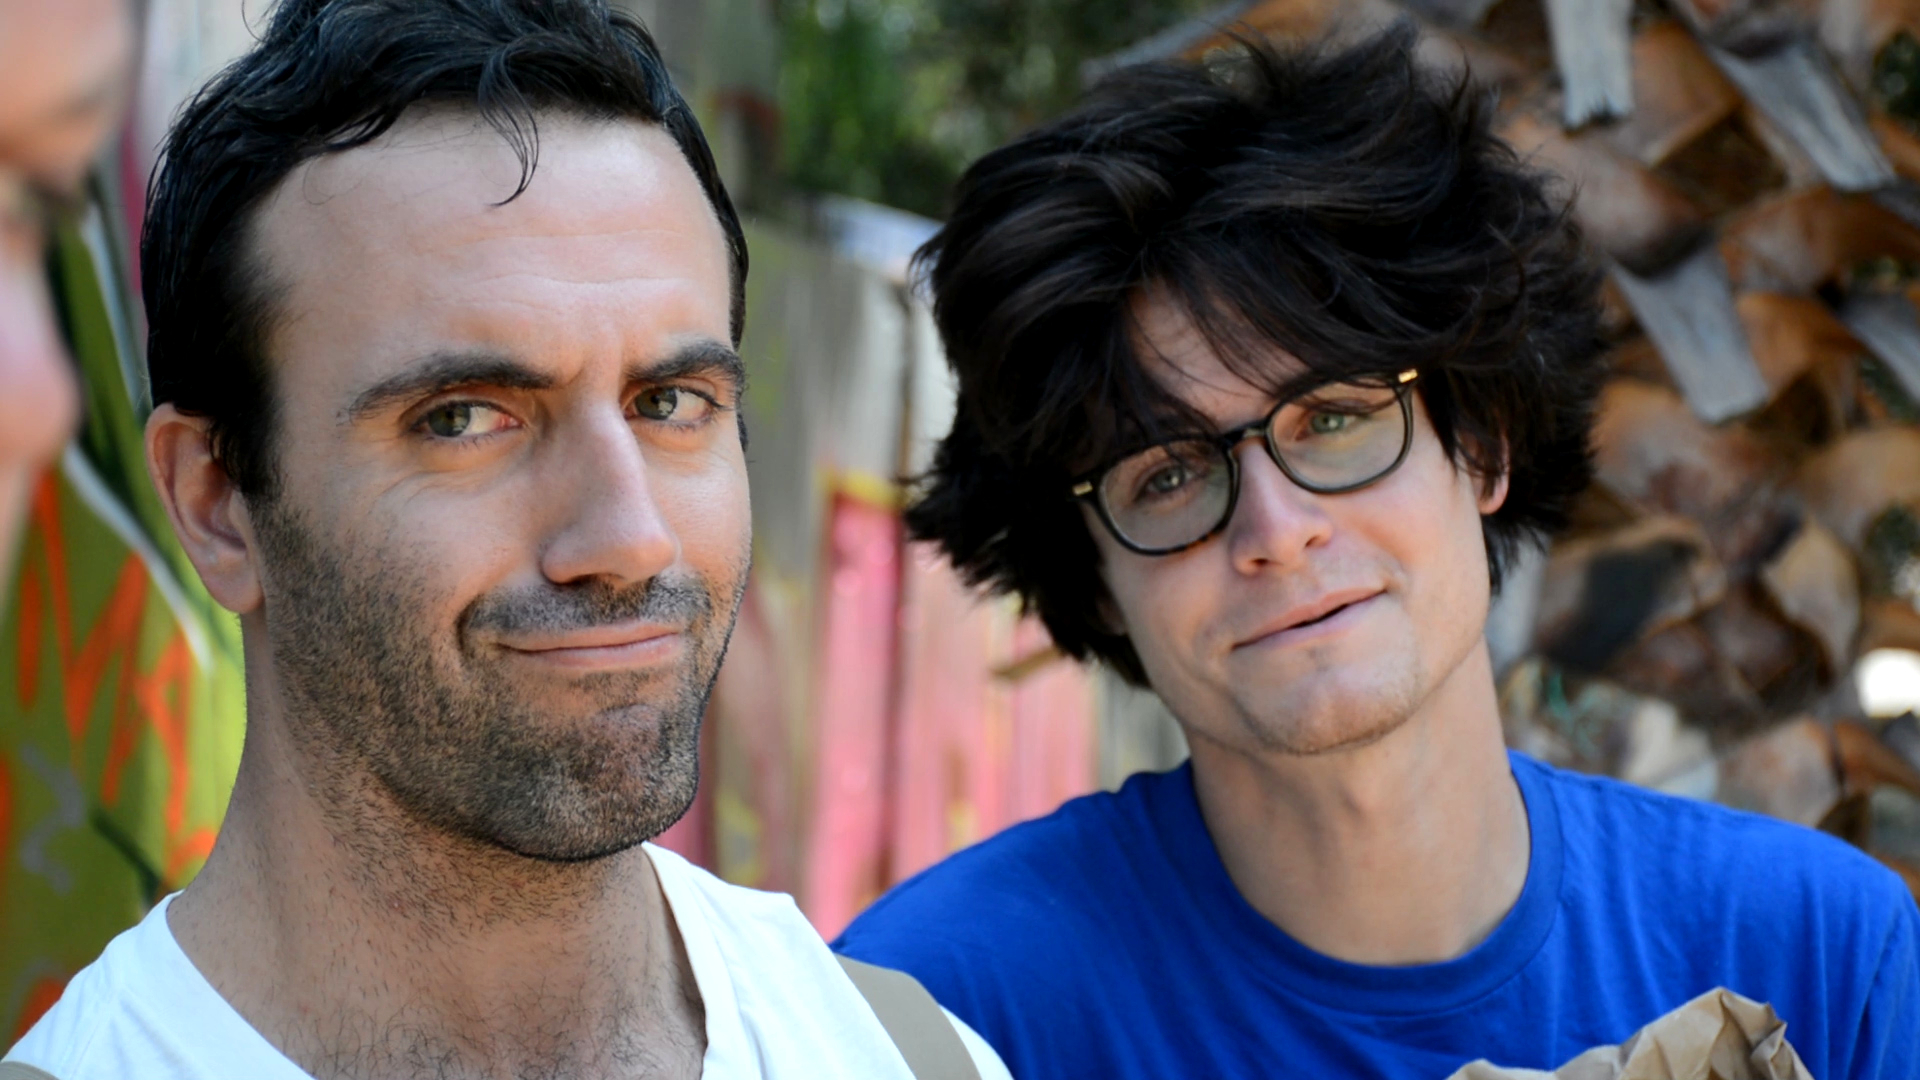 Daniel Van Thomas as Brock Banner and Paul Wurth as Perry Au Pere in the pilot episode of Pheromone Party (2014)